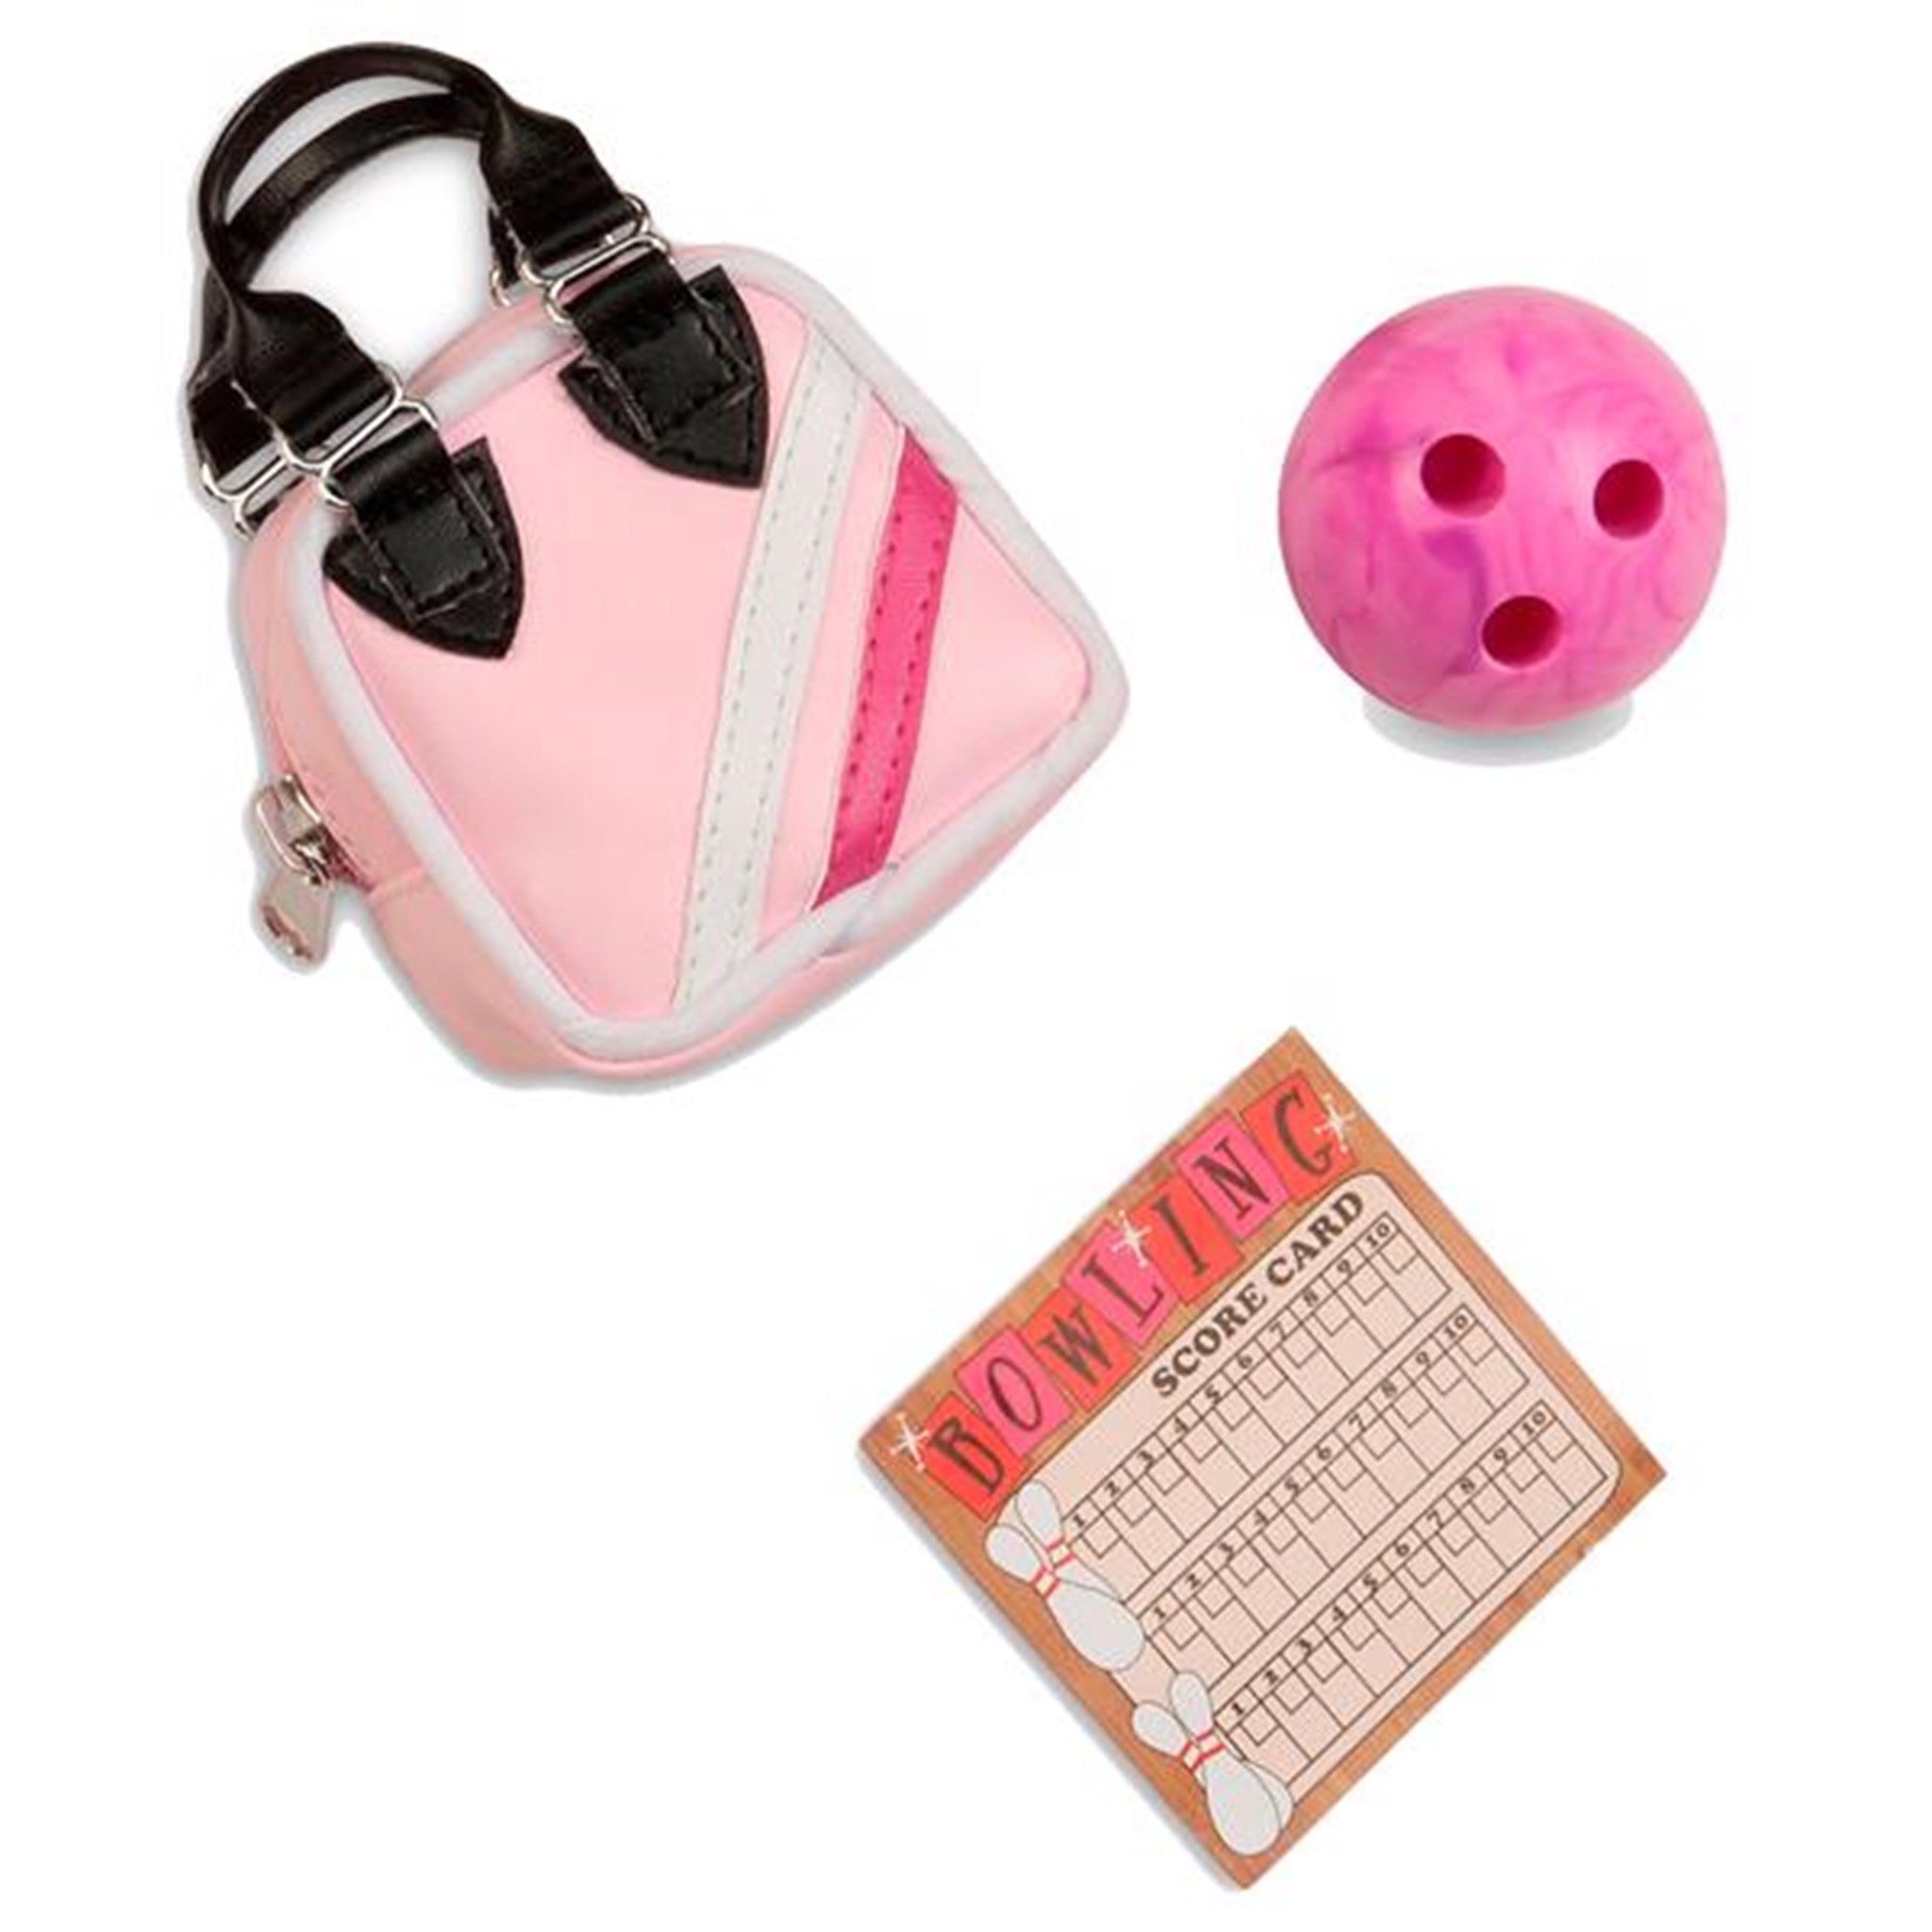 Our Generation Doll Accessories Retro - Bowling